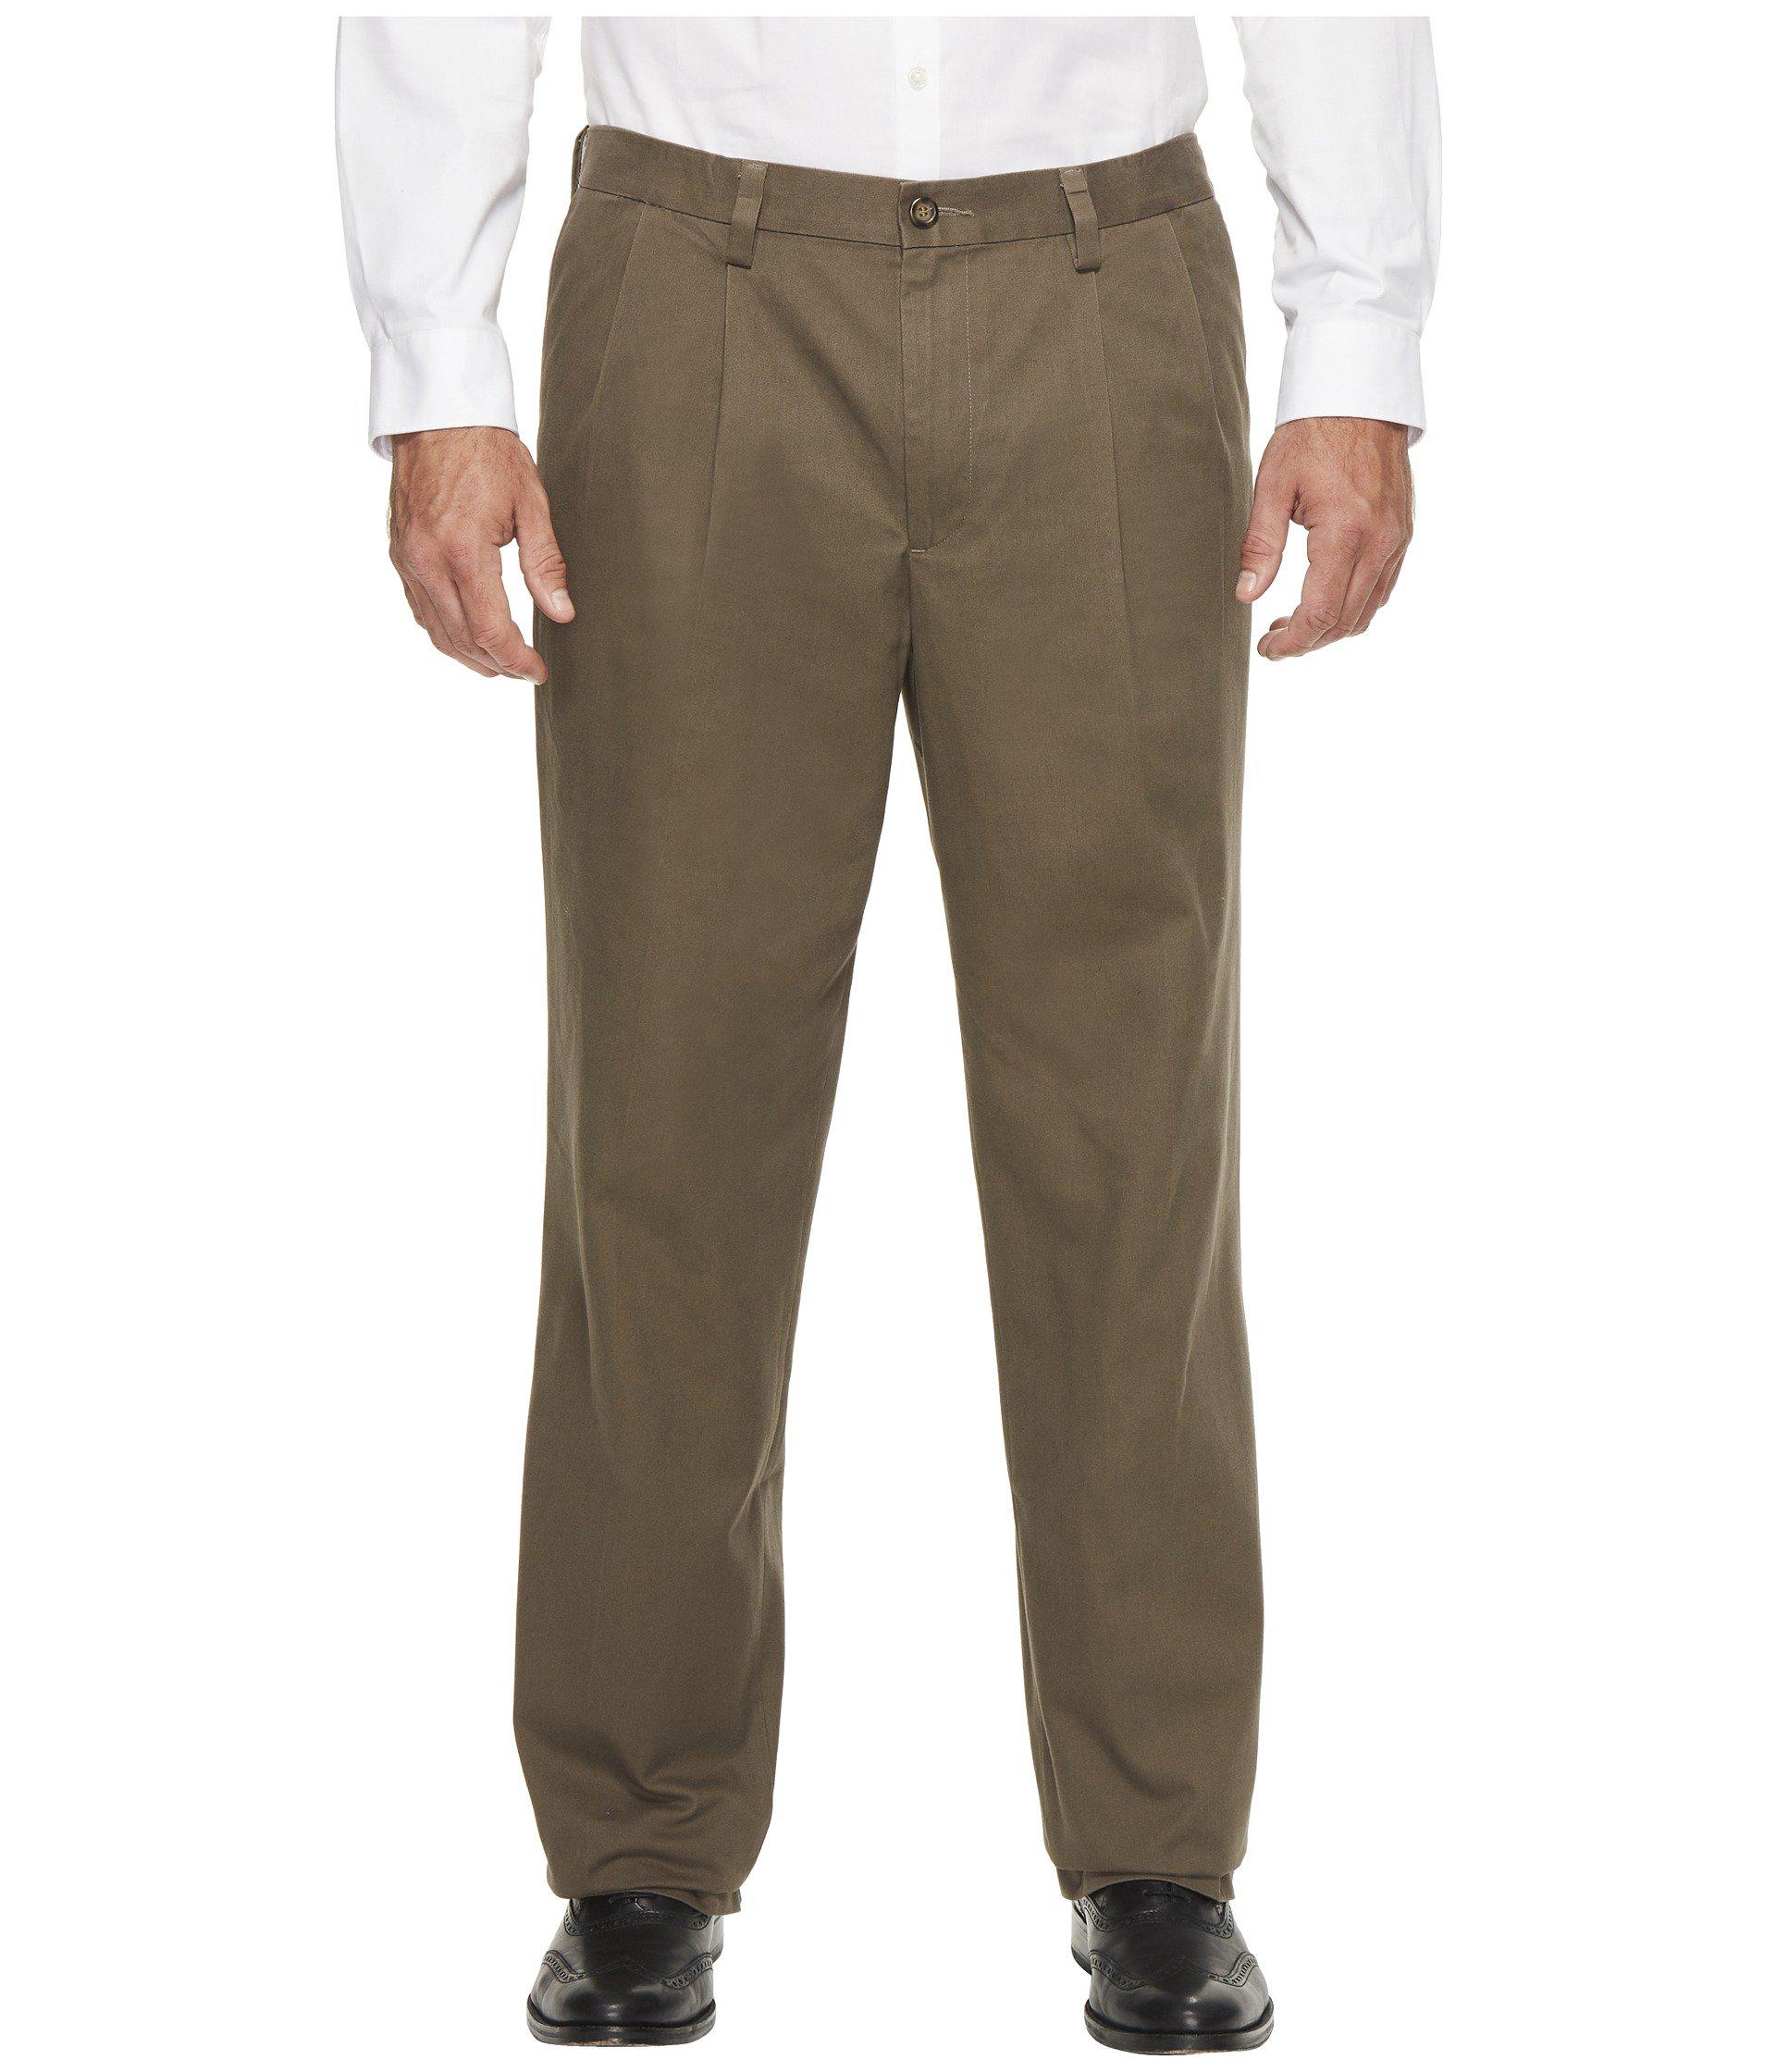 Lyst - Dockers Big & Tall Easy Khaki Pleated Pants for Men - Save 8%